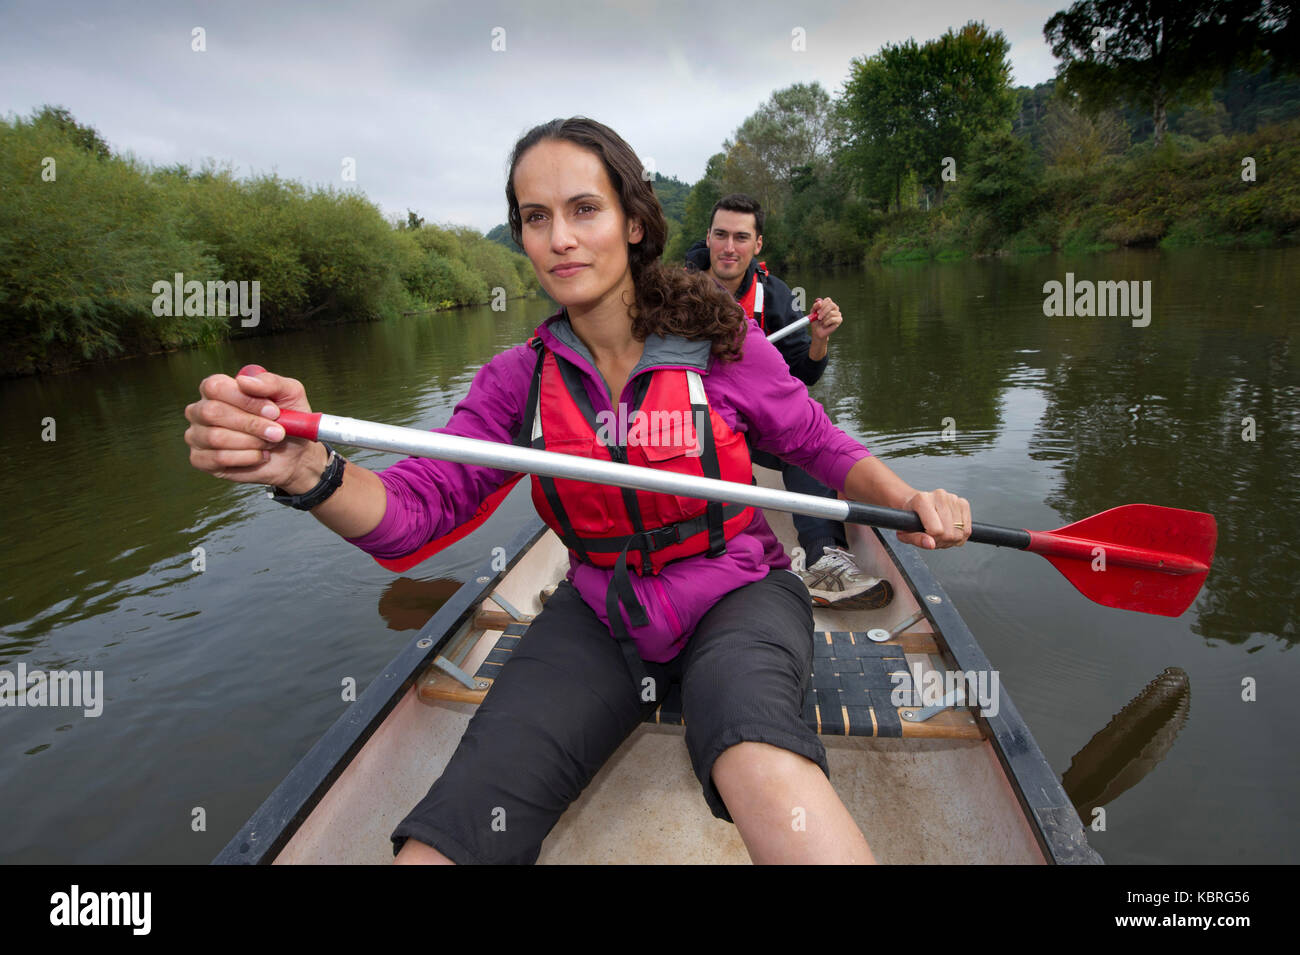 Broadcaster, model, anthropologist Mary-Ann Ochota canoing with her husband Joe Craig on the River Severn with their dog 'Harpo'. Stock Photo